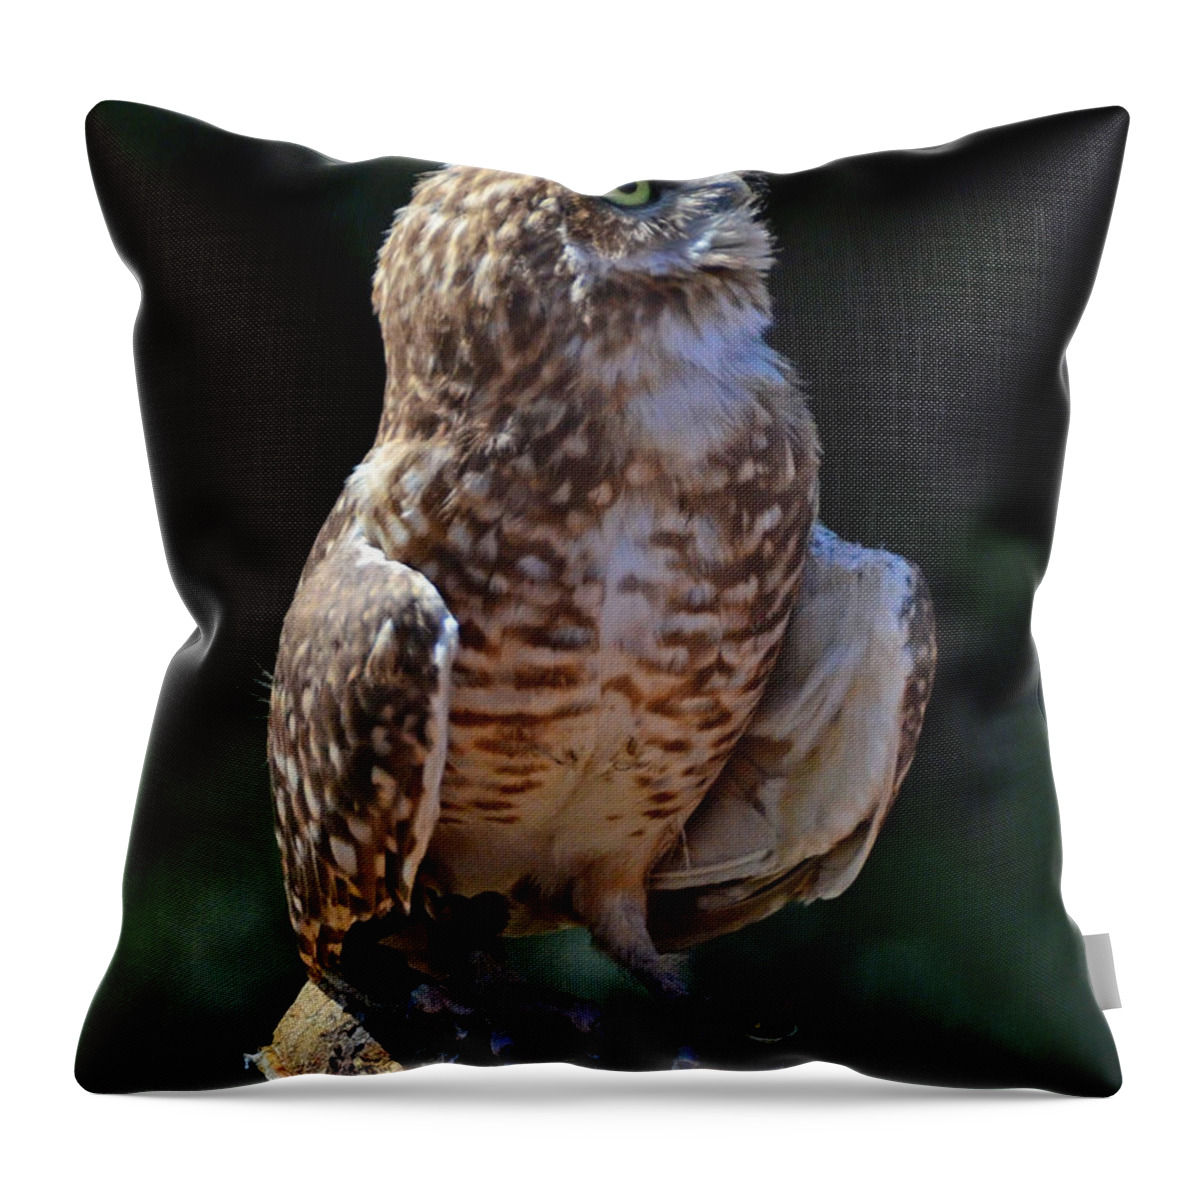 Burrowing Owl Throw Pillow featuring the photograph Burrowing Owl by Debby Pueschel